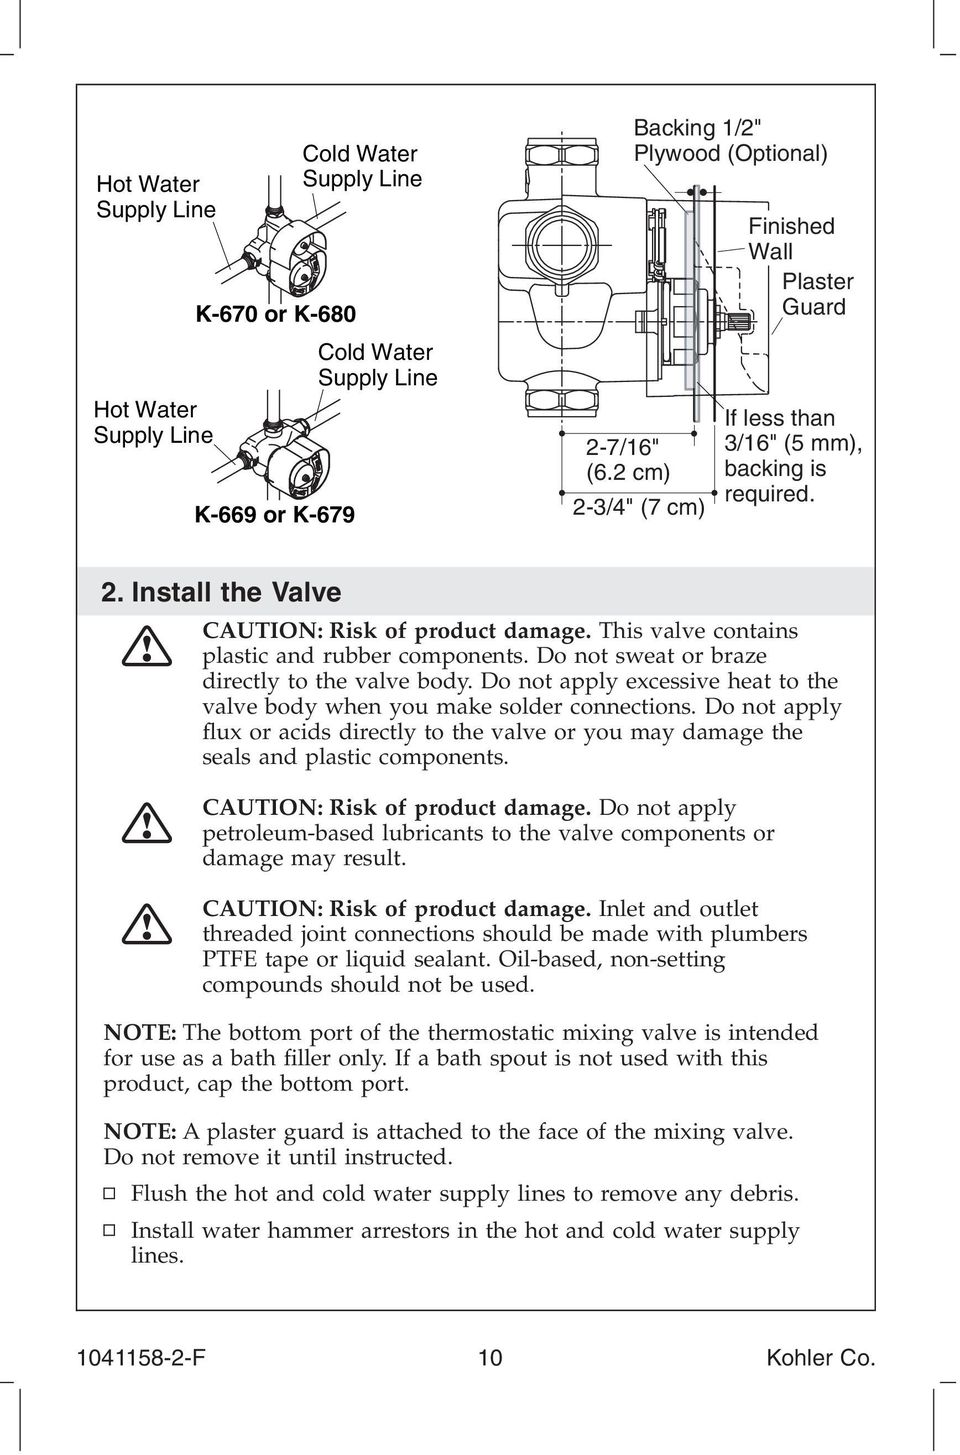 Do not sweat or braze directly to the valve body. Do not apply excessive heat to the valve body when you make solder connections.